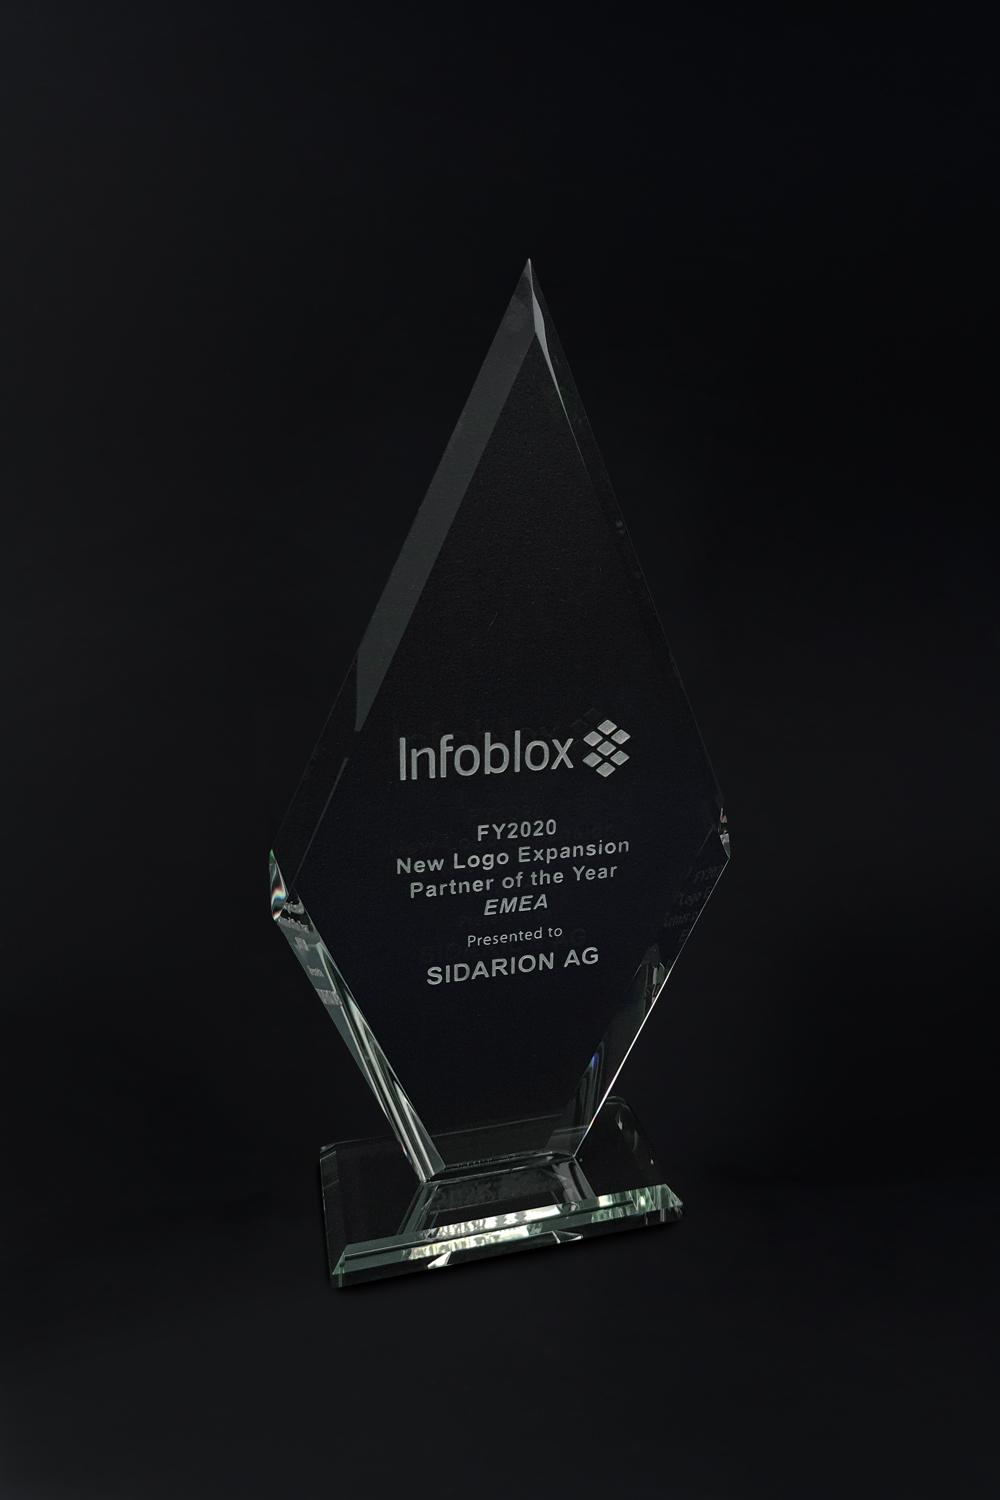 Infoblox EMEA New Logo Expansion Partner of the Year 2020